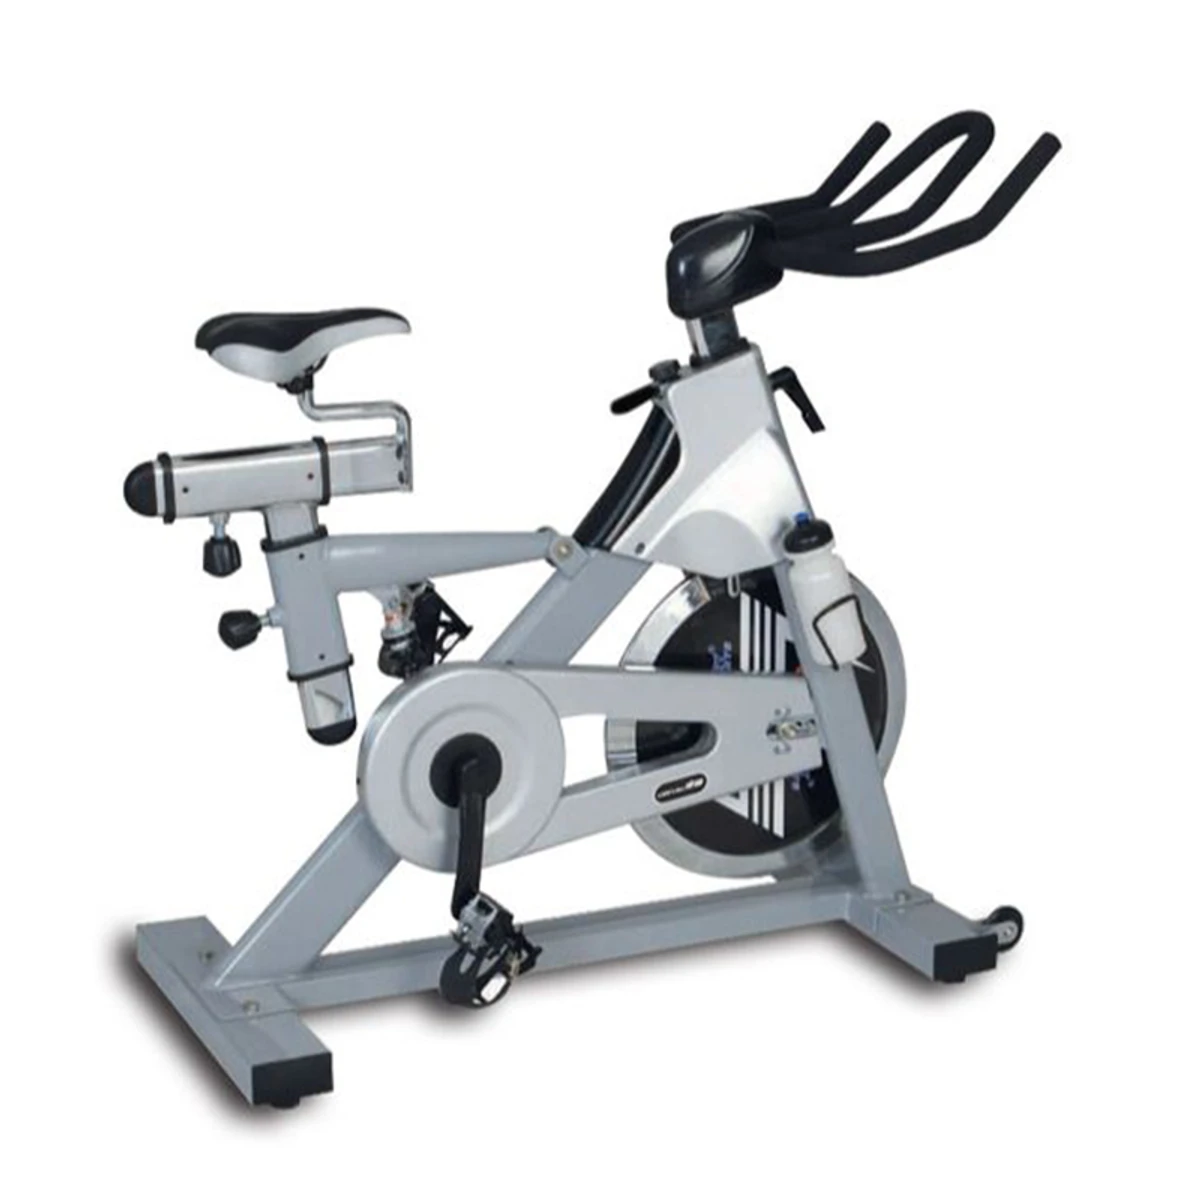 DAILY YOUTH FD9873 SPINNING BIKE - COMMERCIAL SPINNING BIKE